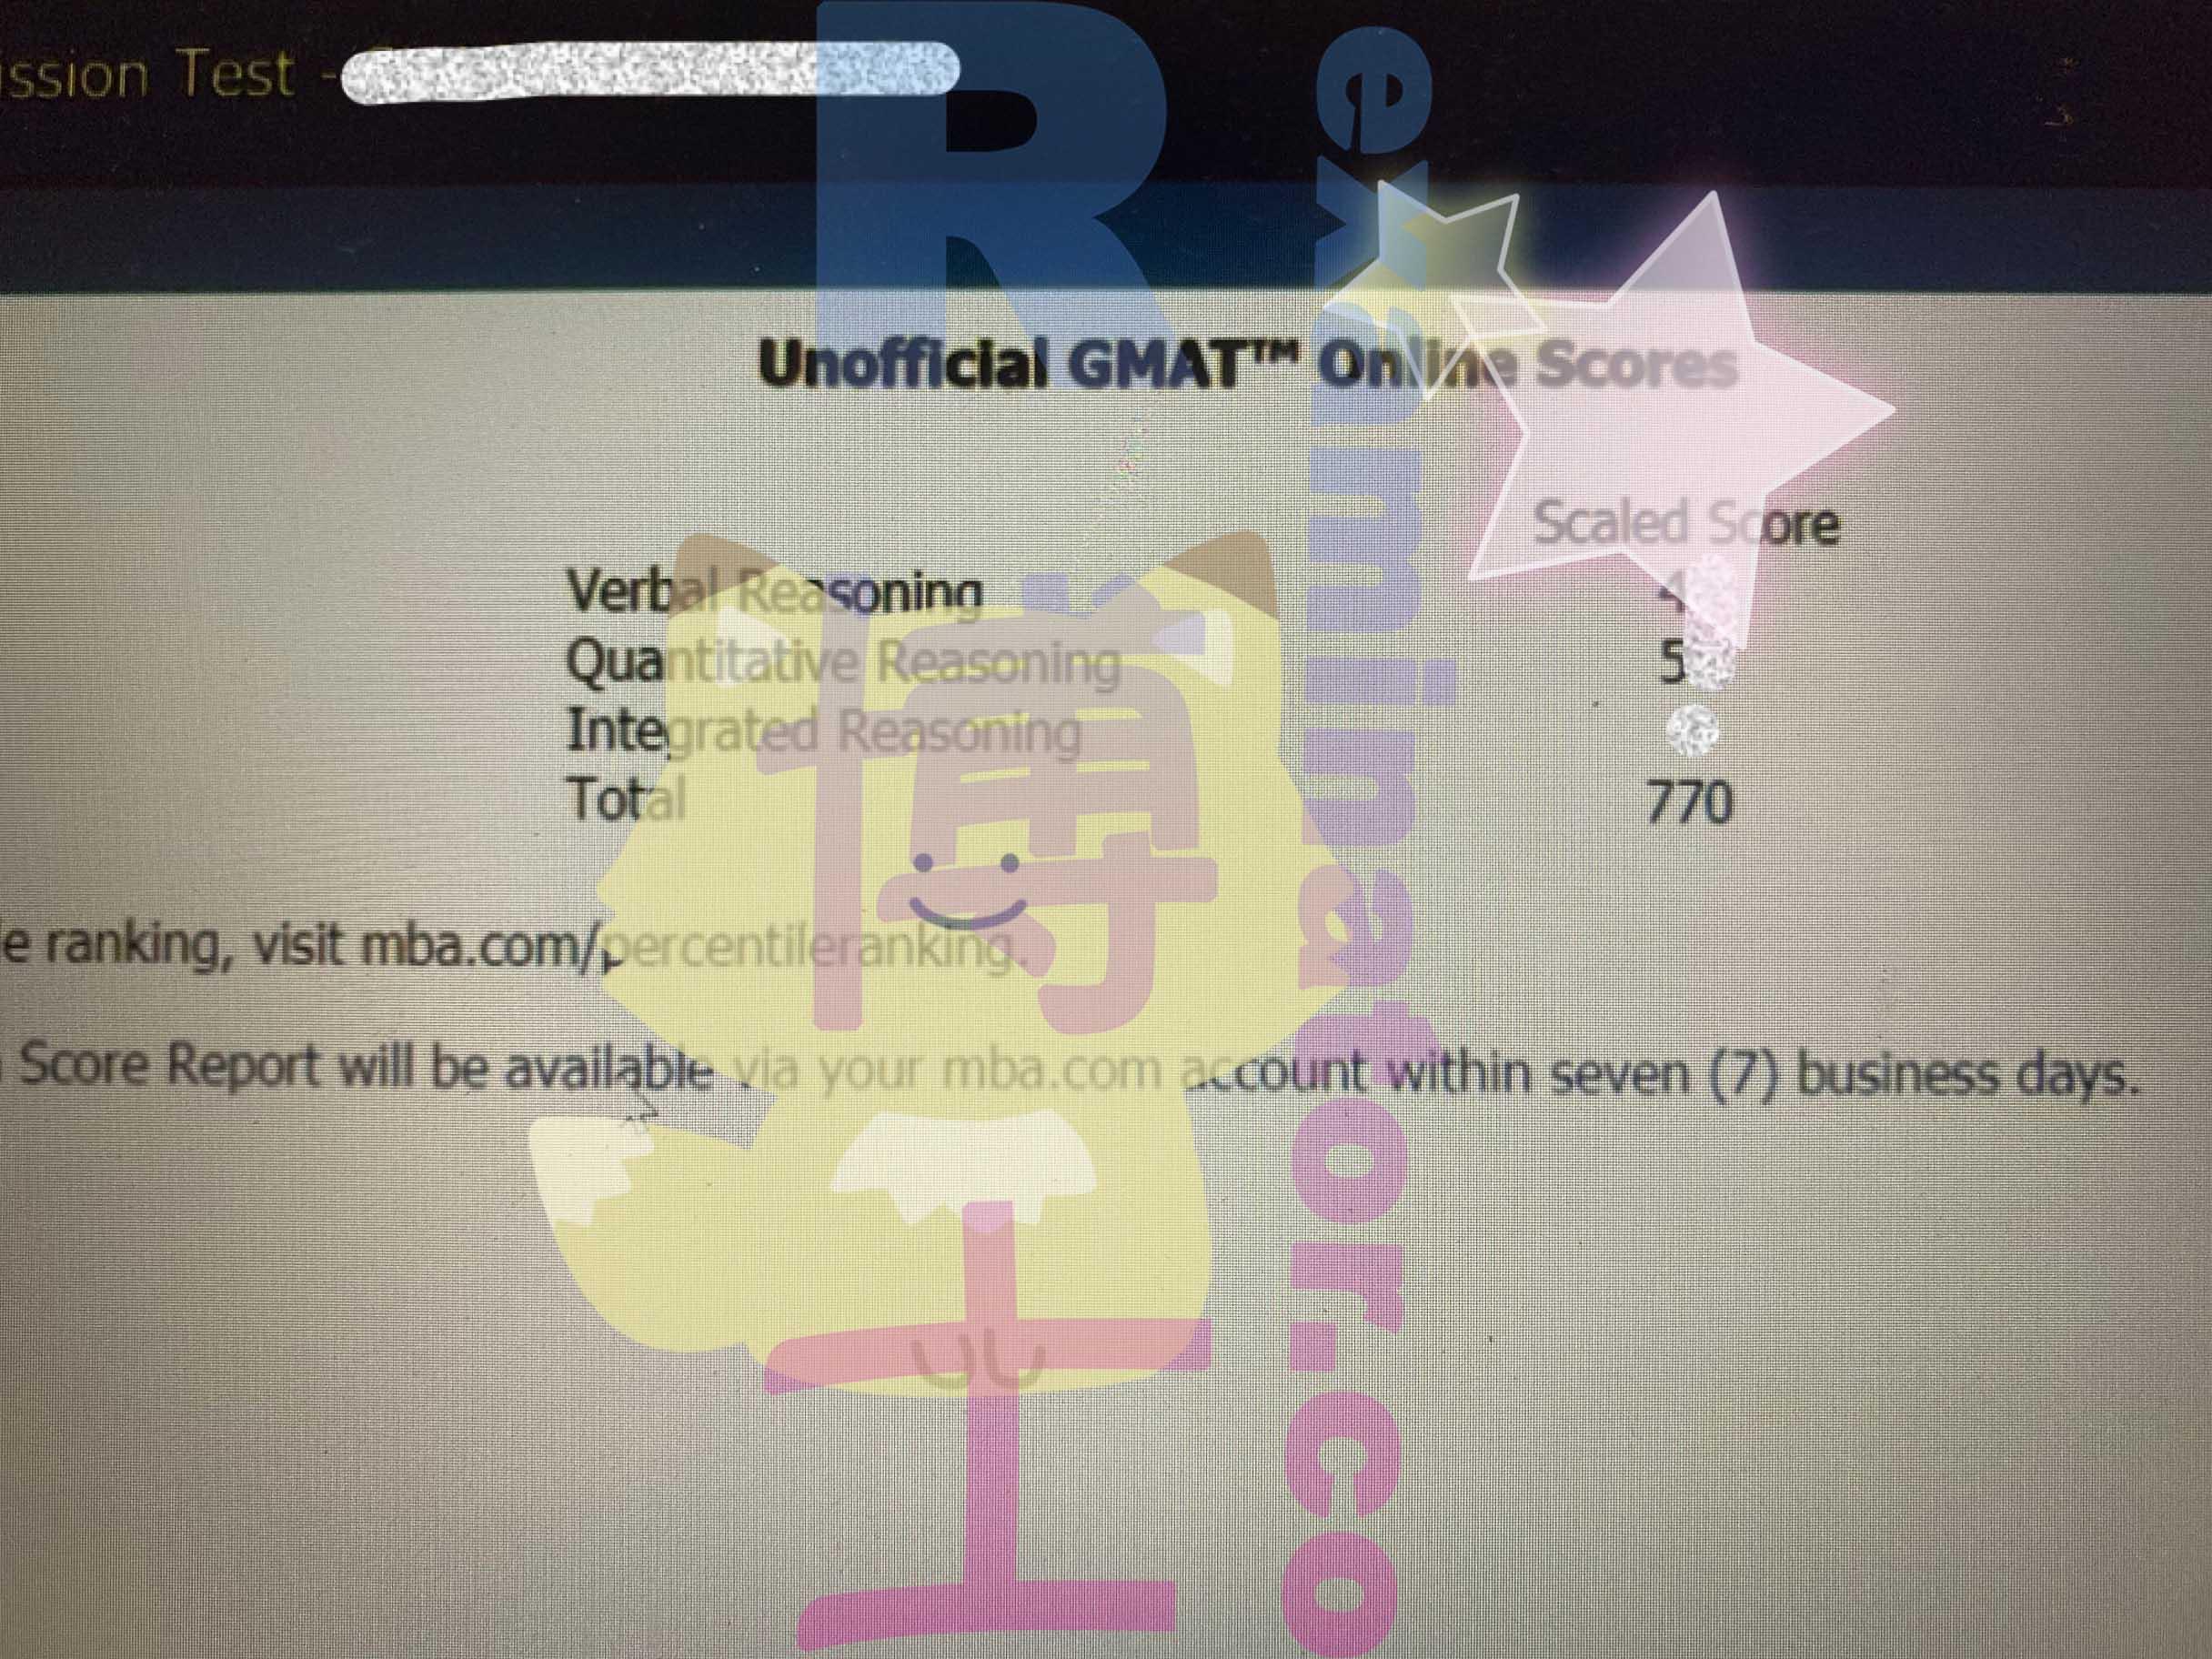 score image for GMAT Cheating success story #237